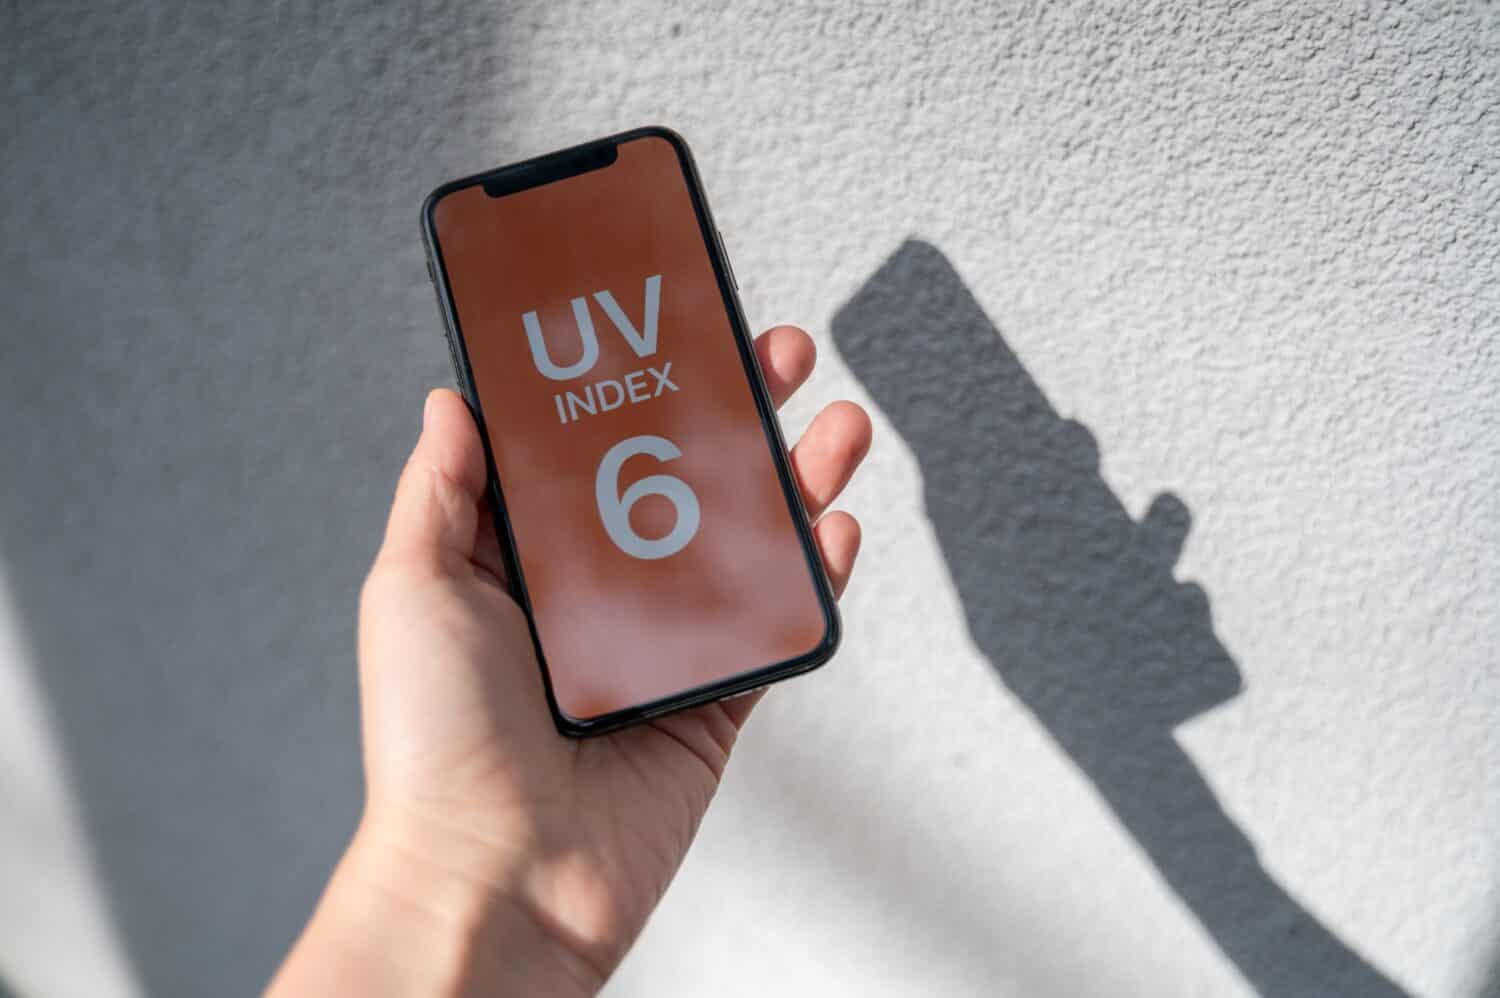 Smartphone in person hands with application showing UV index outside at sunny day